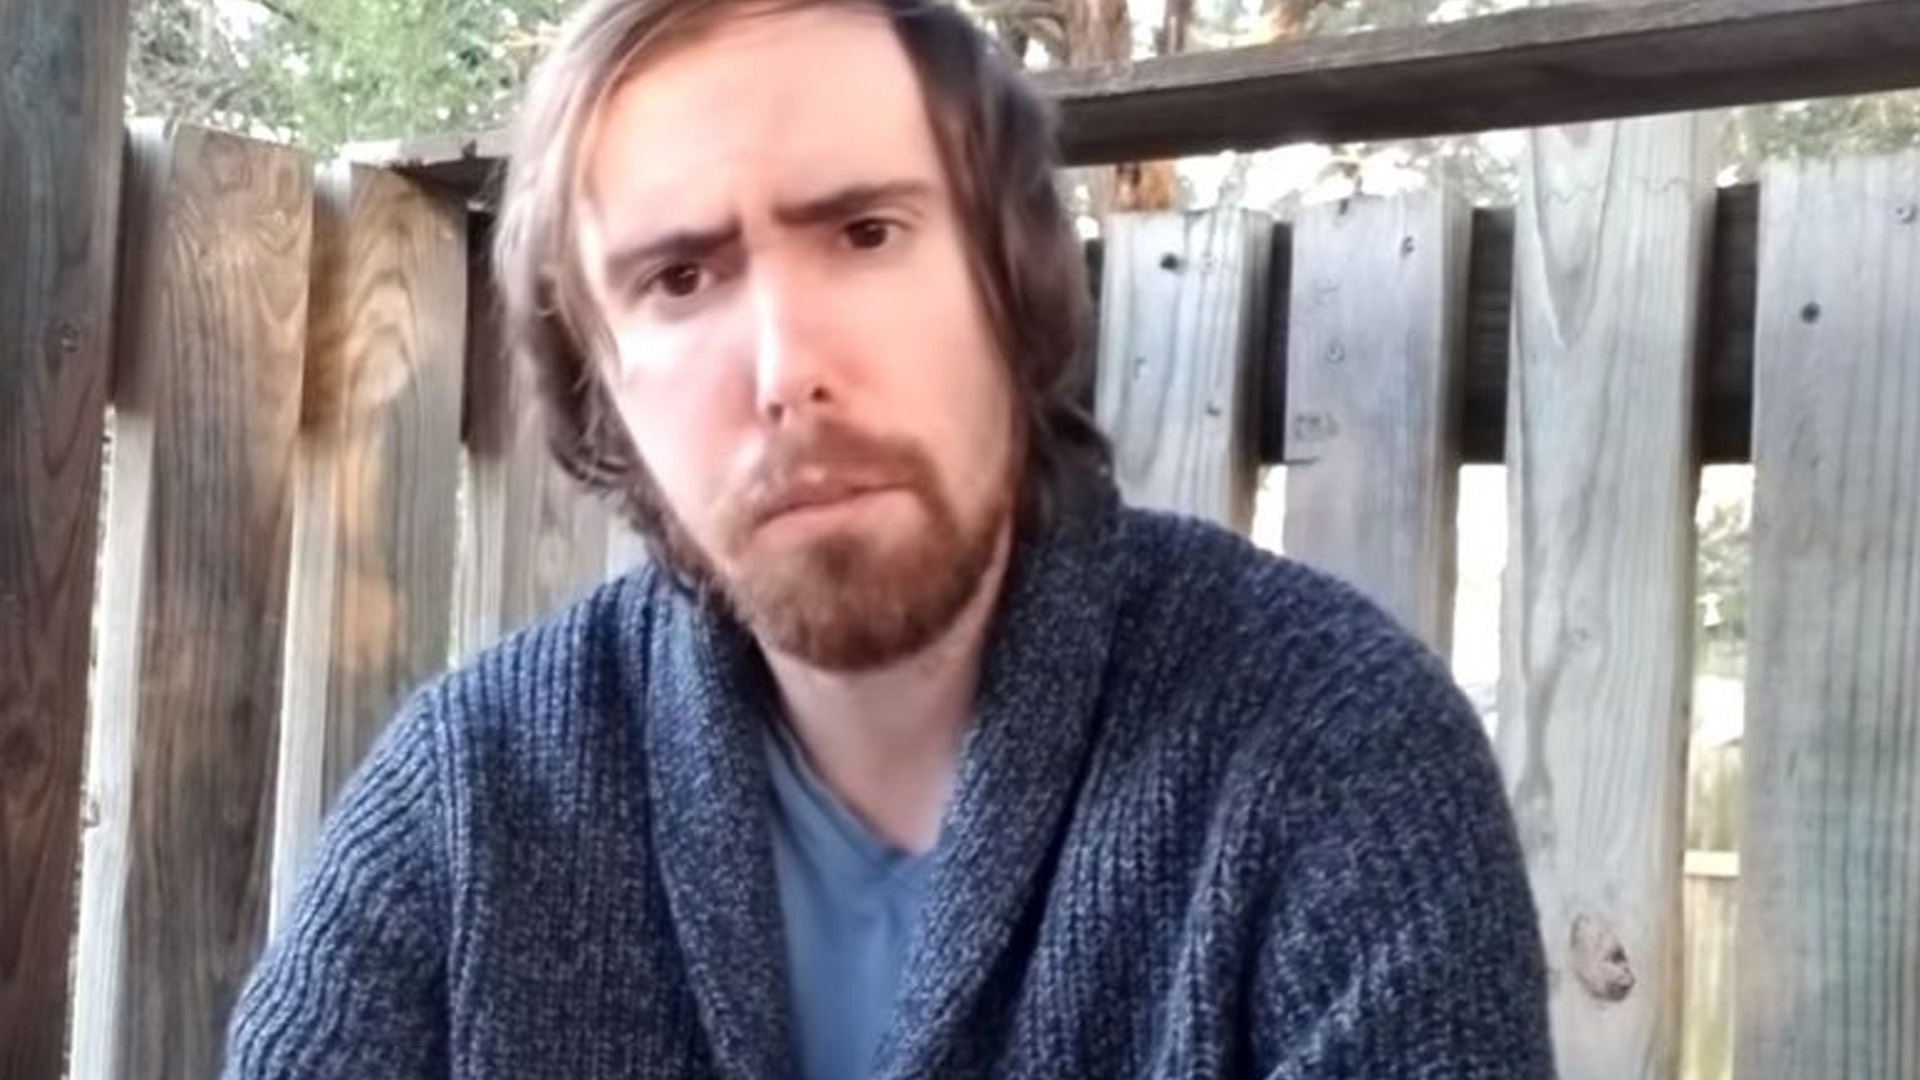 asmongold twitch